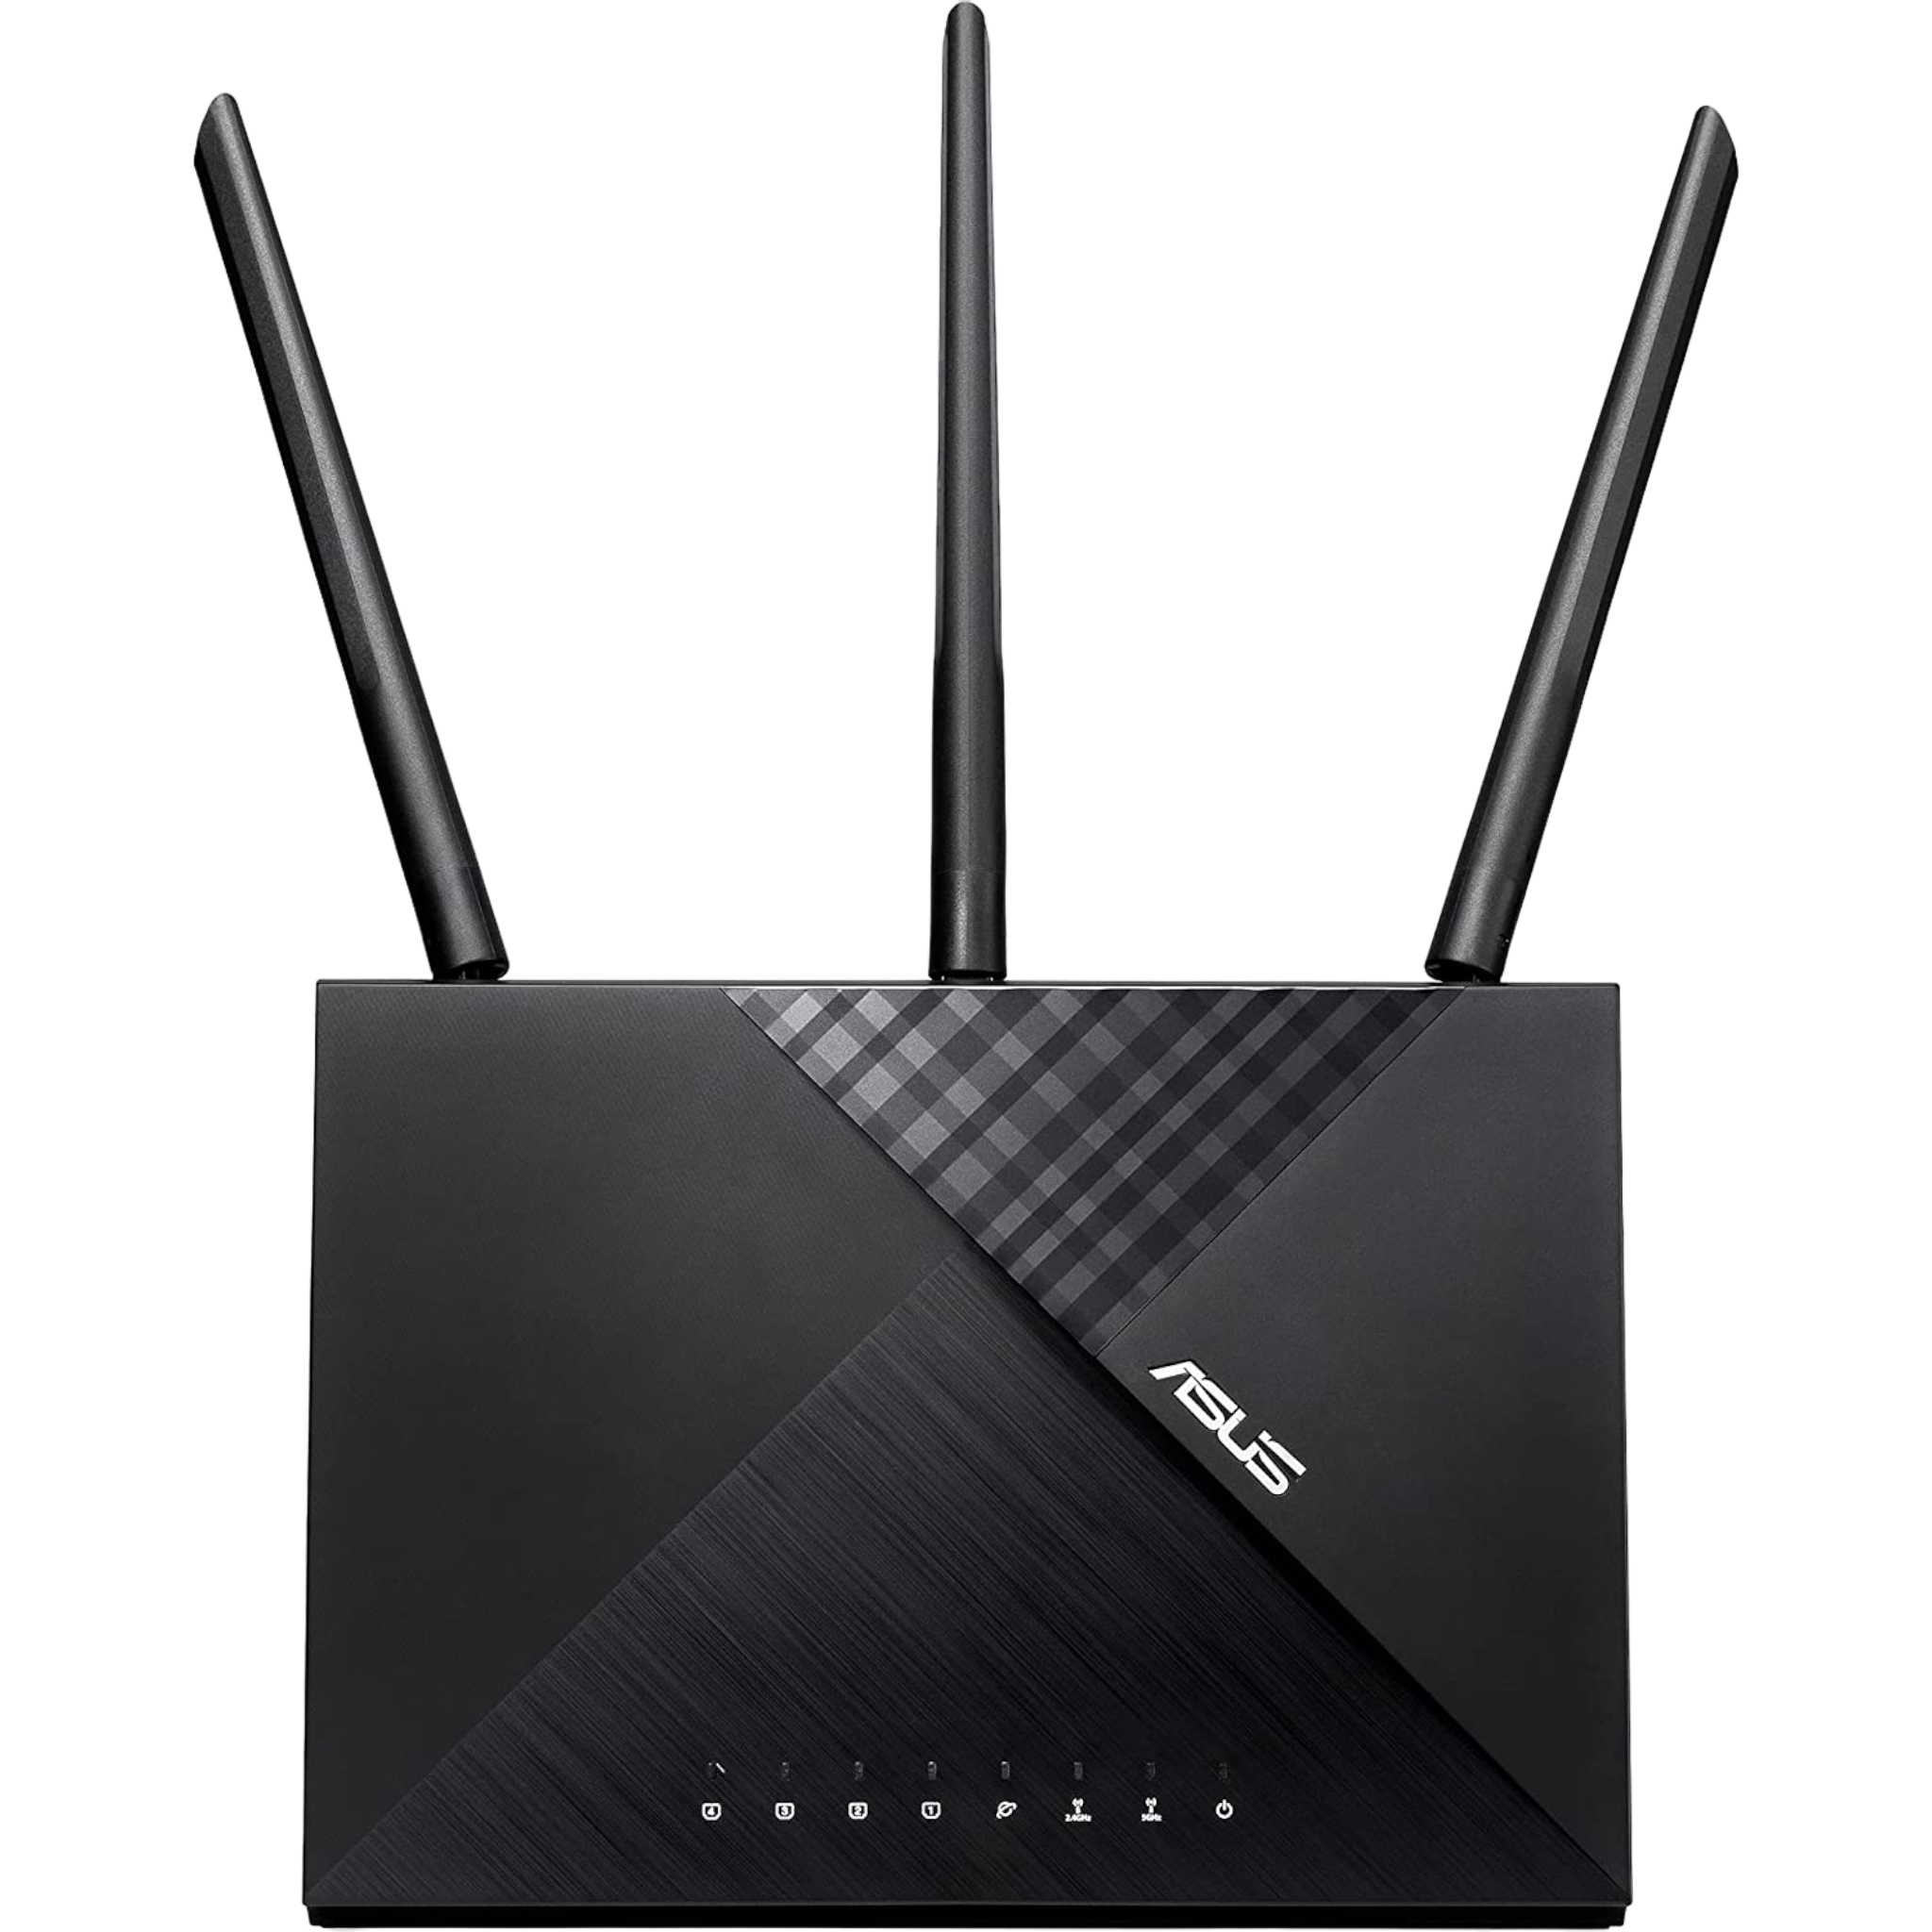 ASUS AC1750 WiFi Router (RT-AC65) - Dual Band Wireless Internet Router - Pro-Distributing